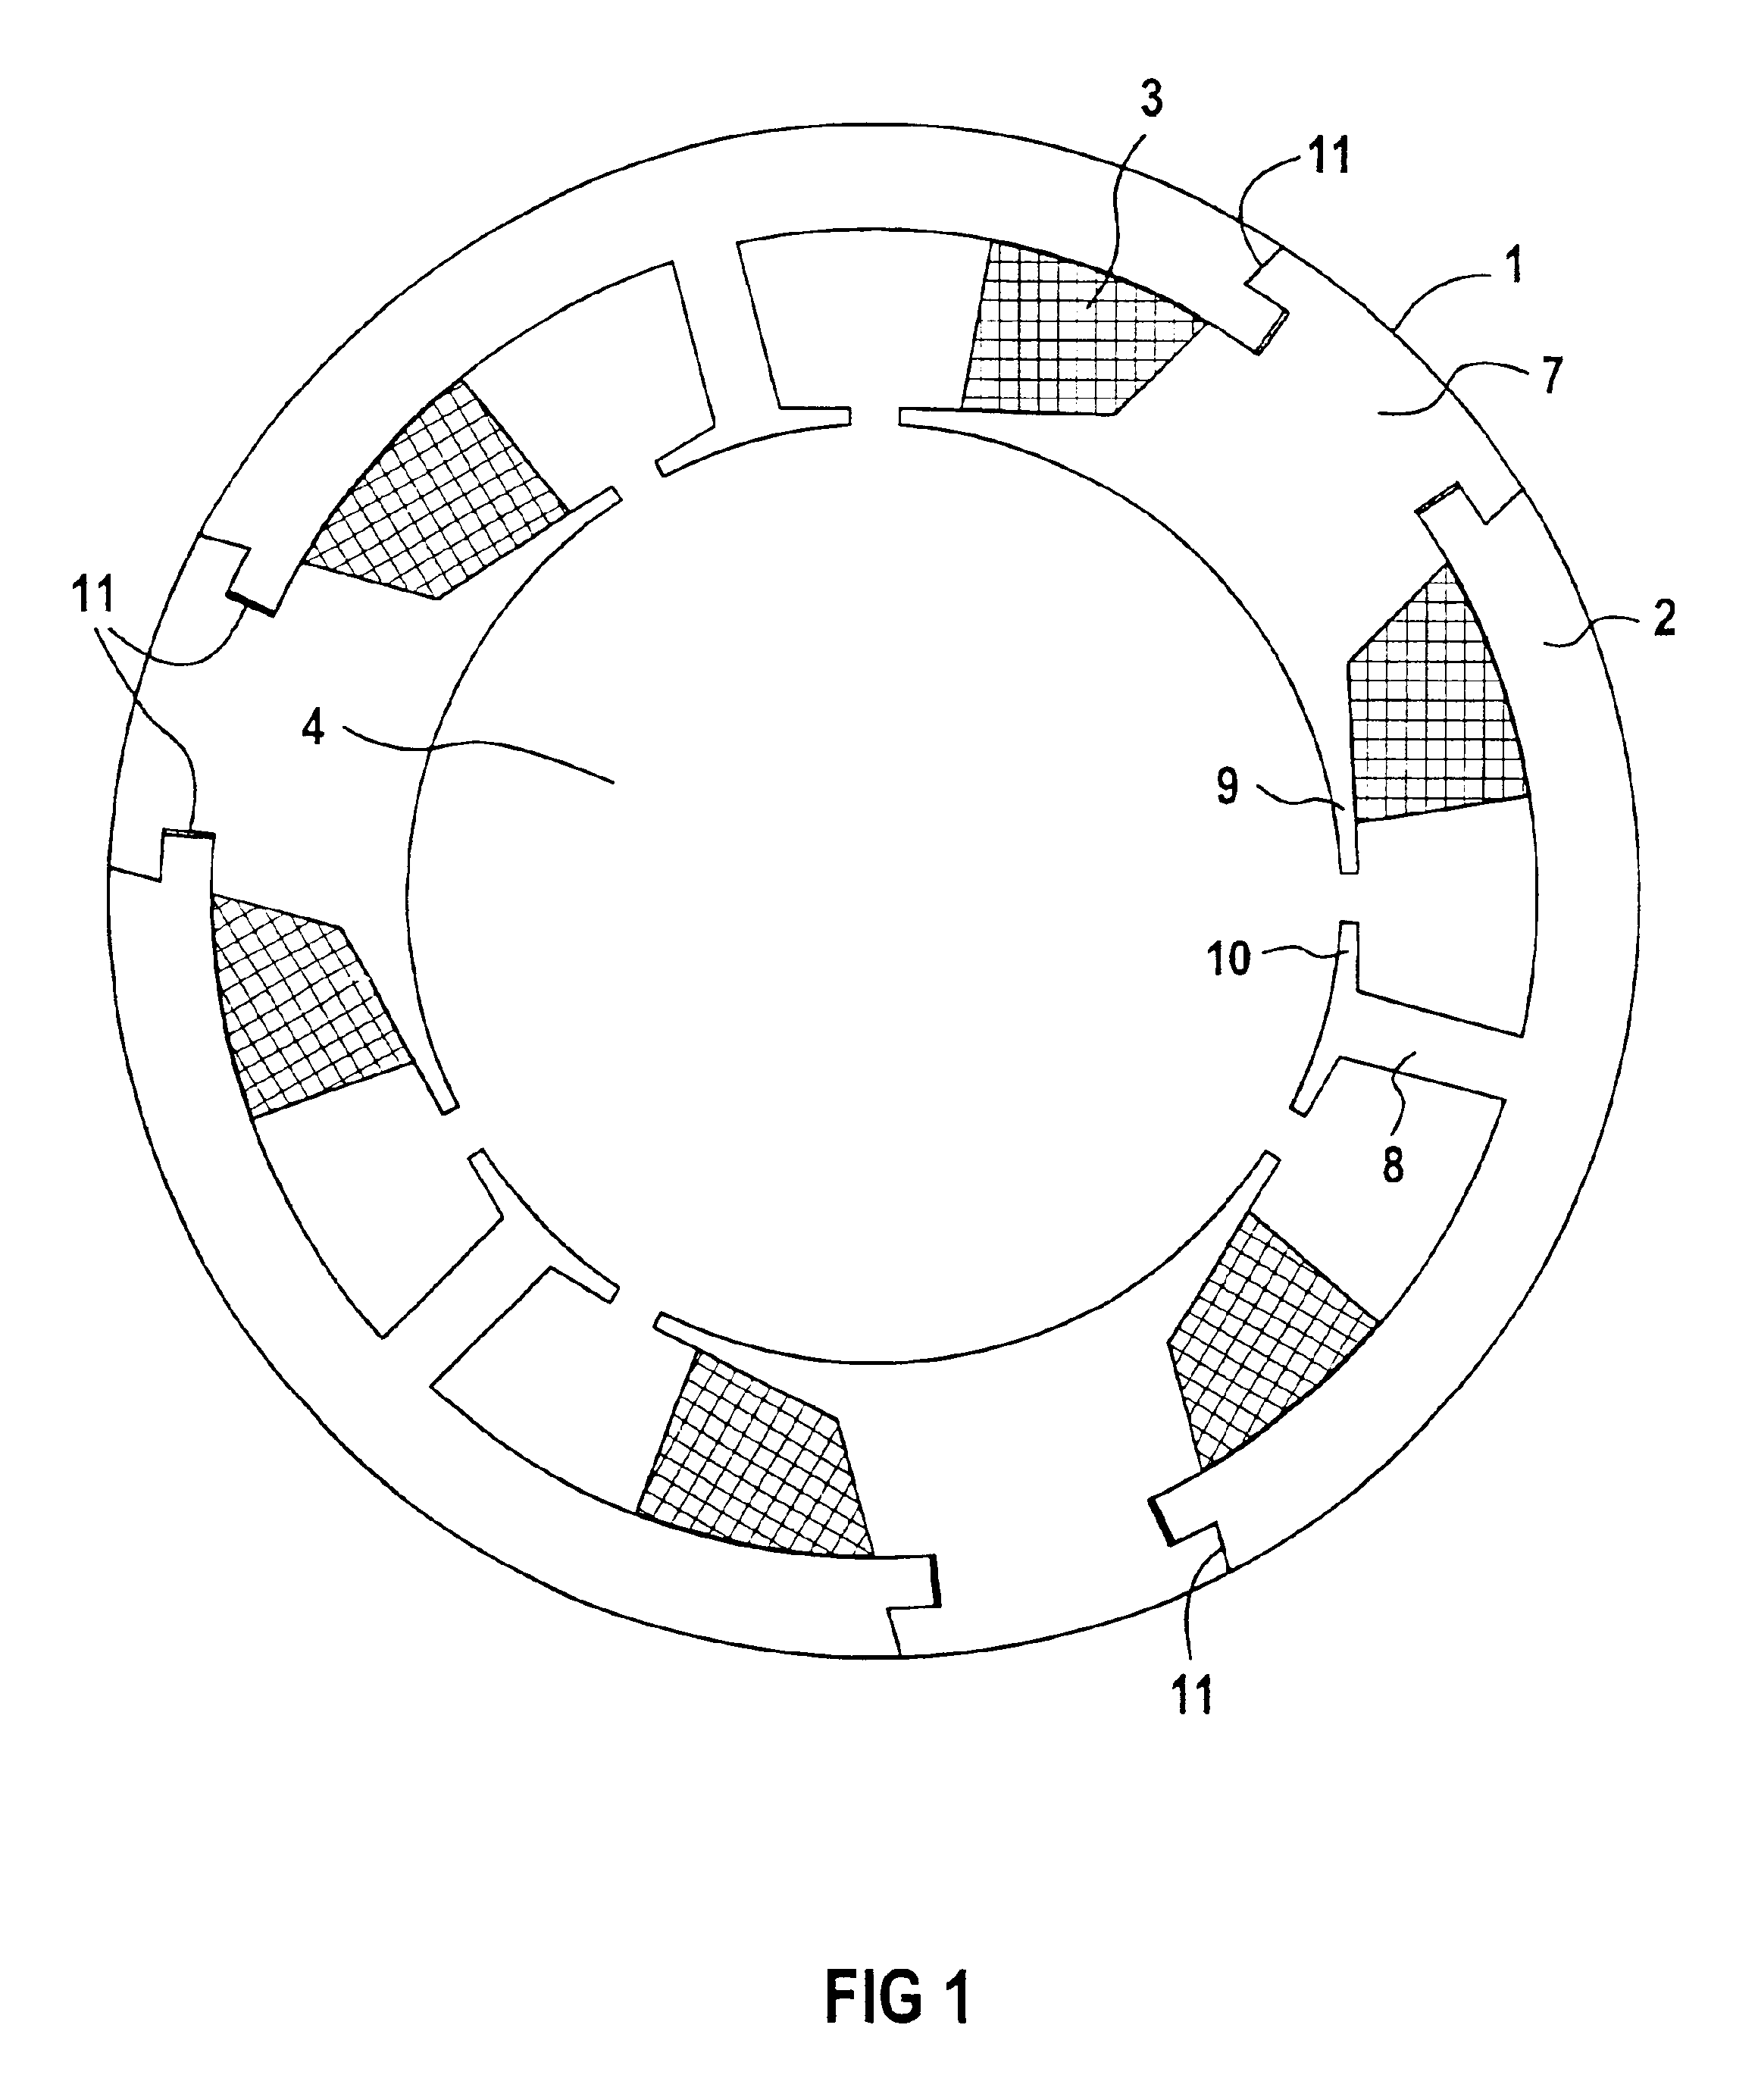 Permanent magnet rotor electrical synchronous machine with different alternatively arranged tooth pitch widths